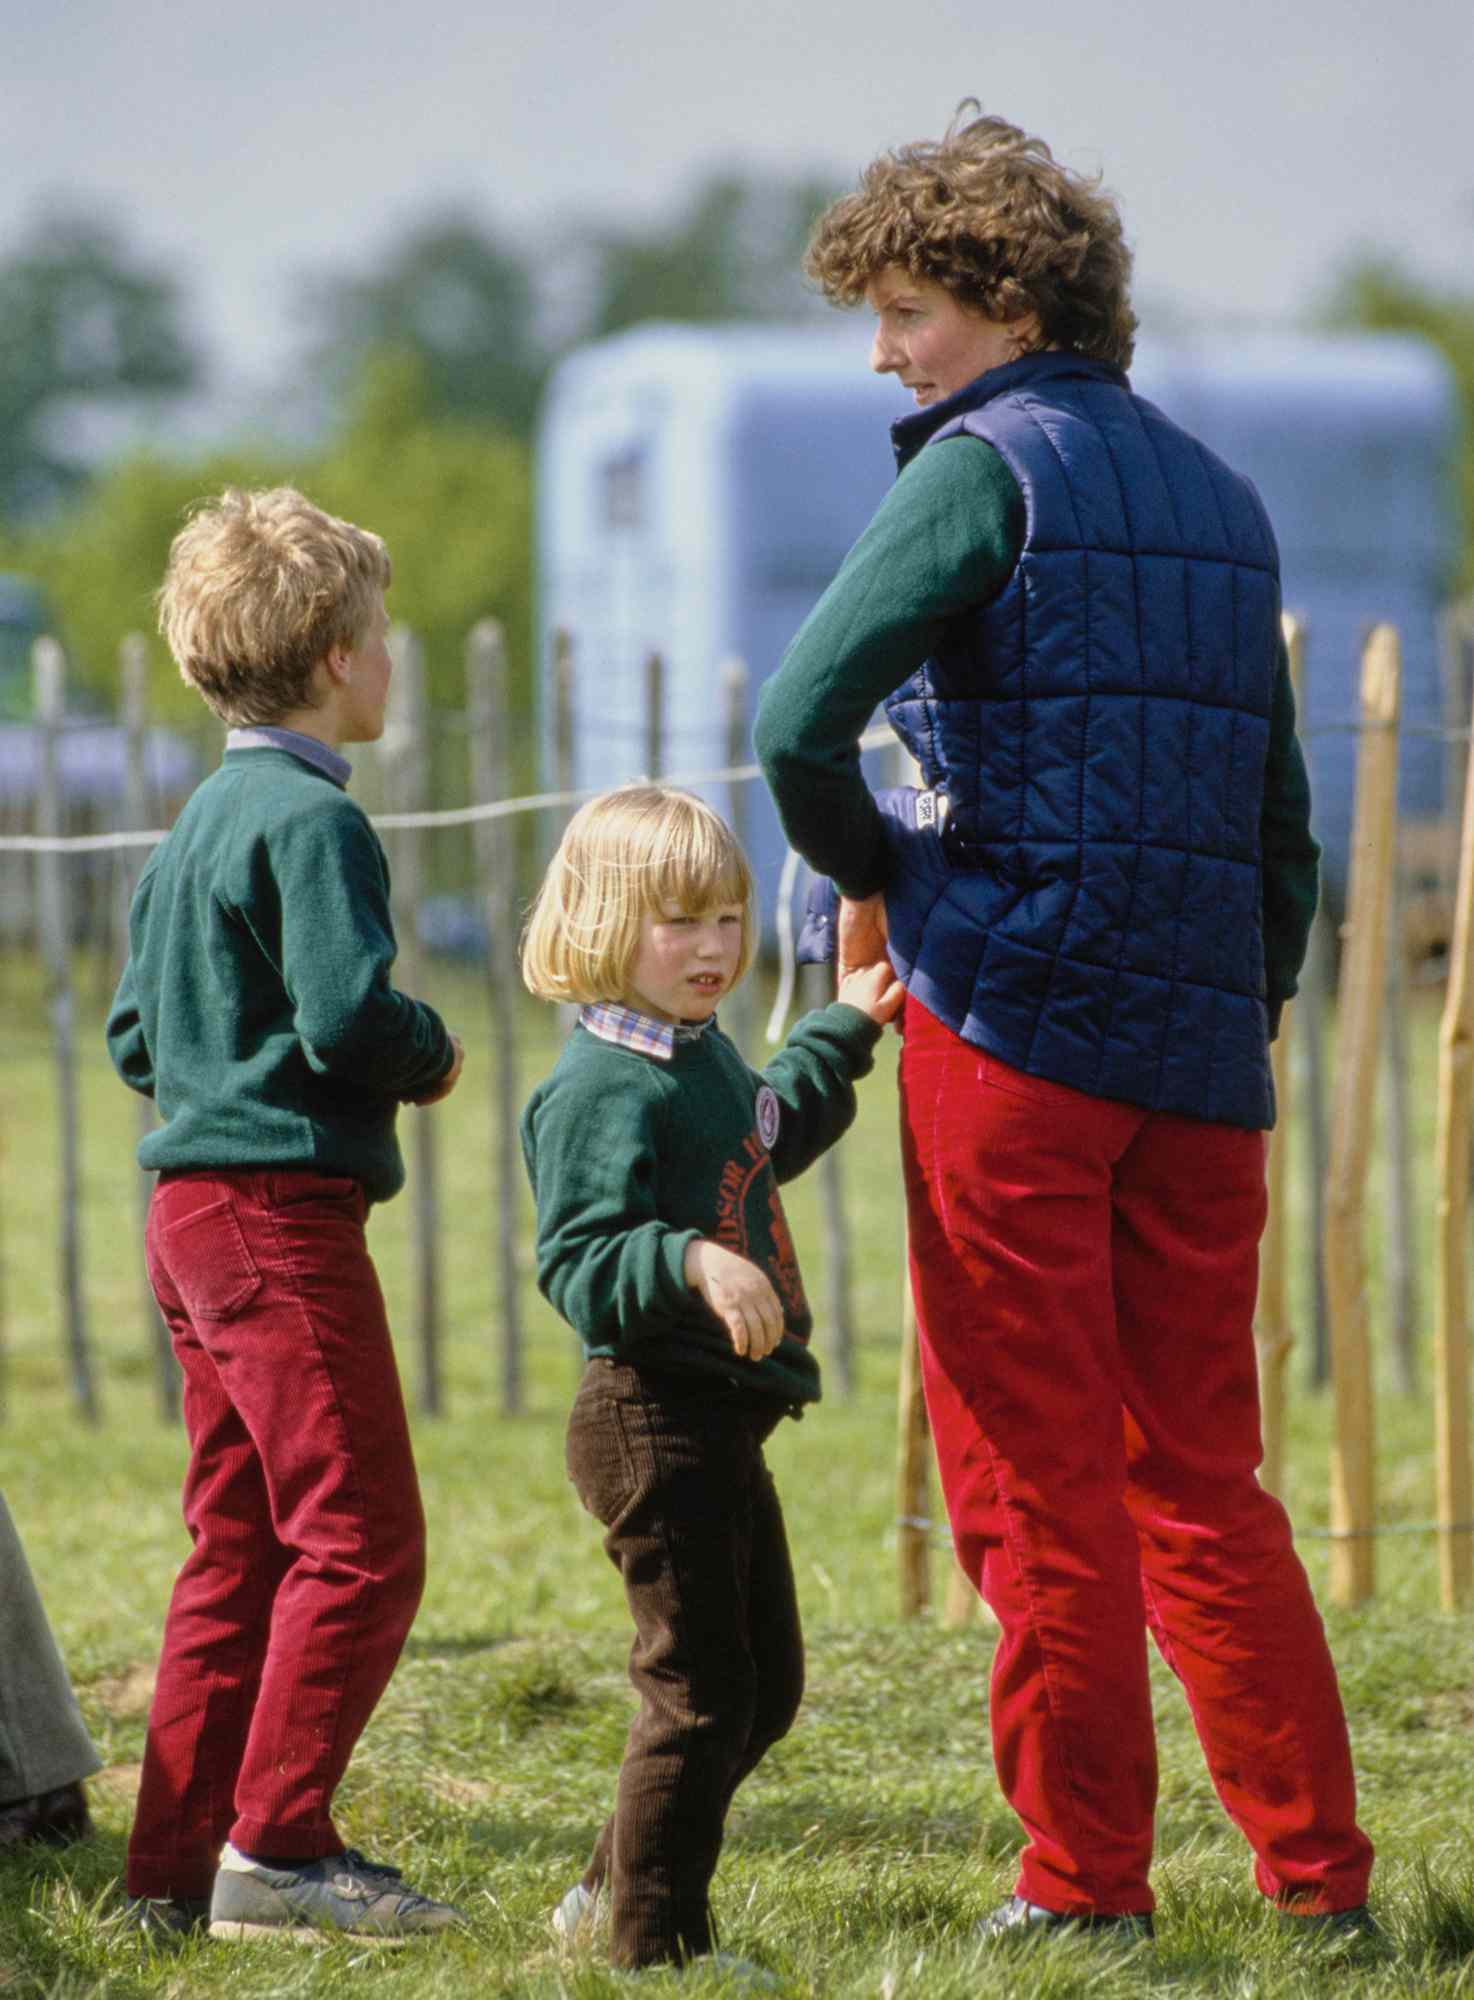 Peter Phillips and his sister Zara Phillips, wearing matching Windsor Horse Trials sweatshirts, with their nanny, Sarah Minty, at the Royal Windsor Horse Show, held at Home Park in Windsor, Berkshire, England, 12th May 1984